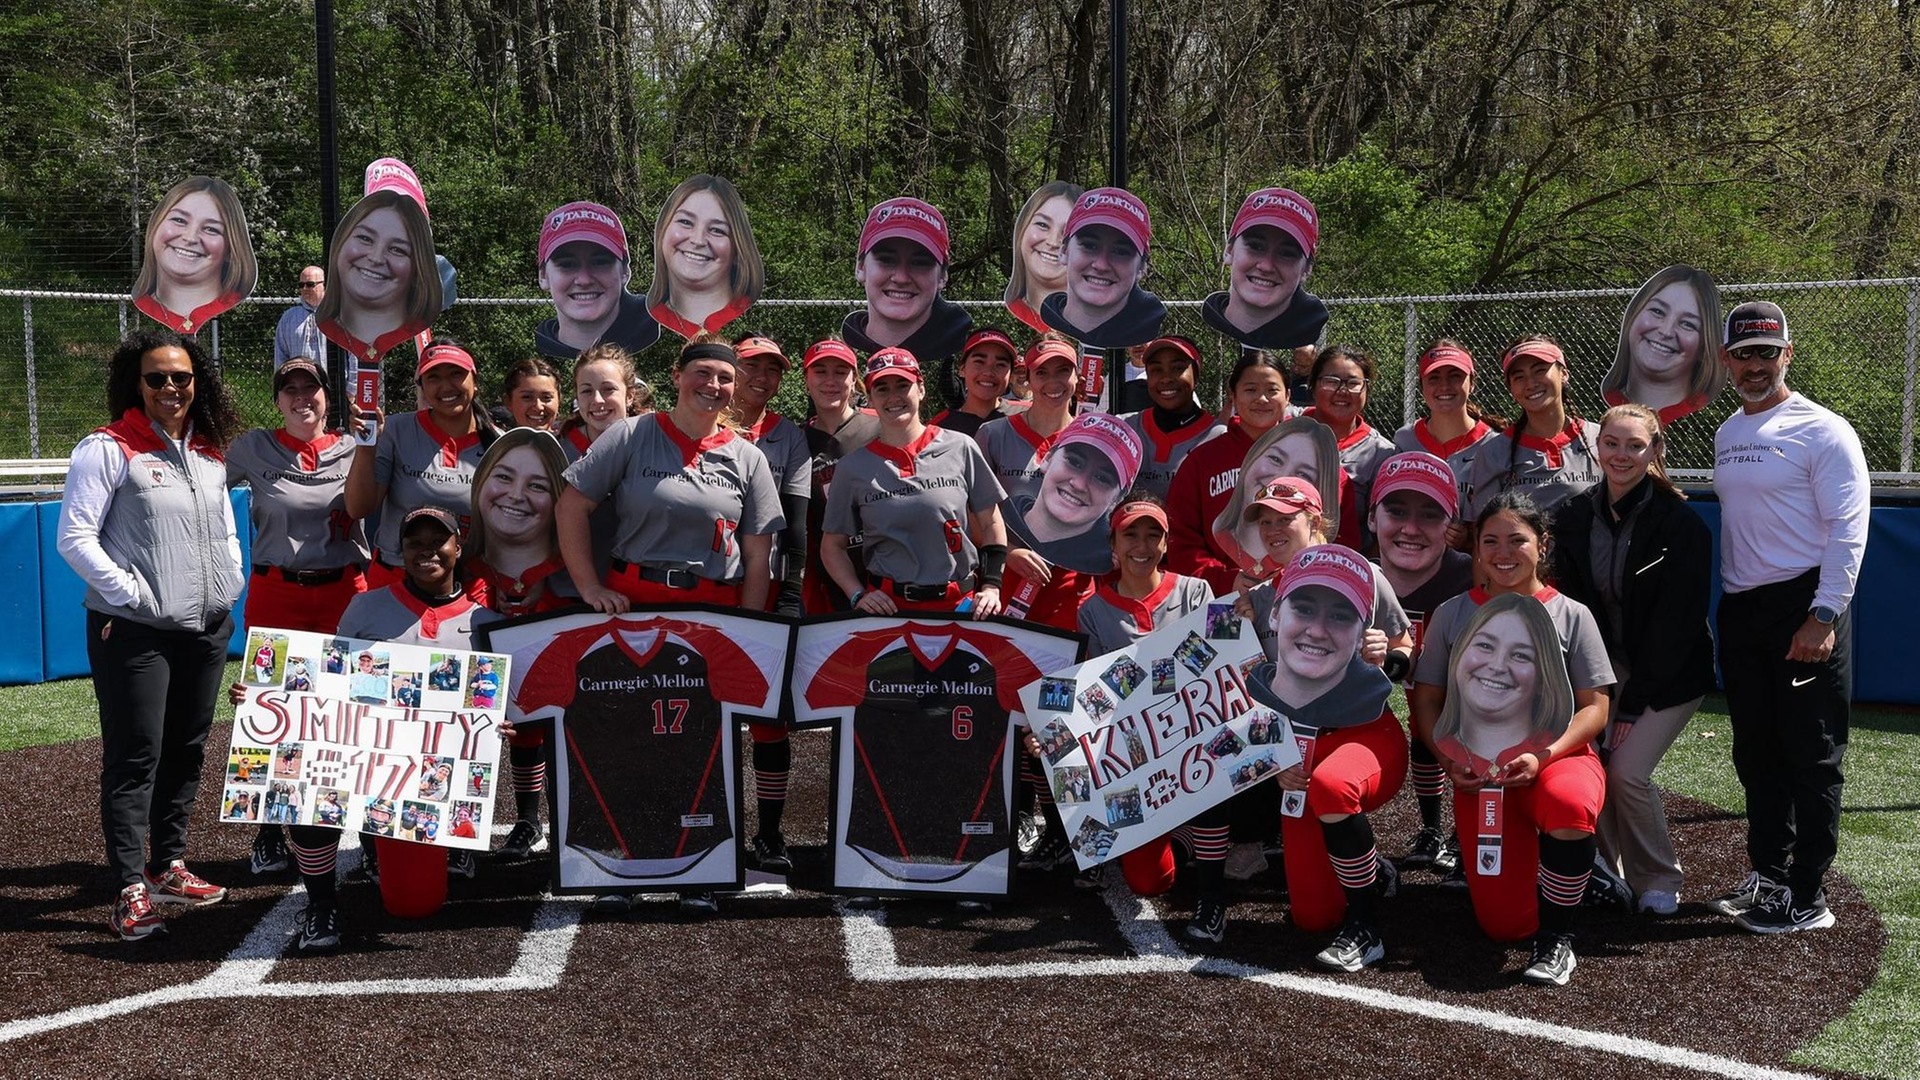 group gathering of women's softball players with signs and photos